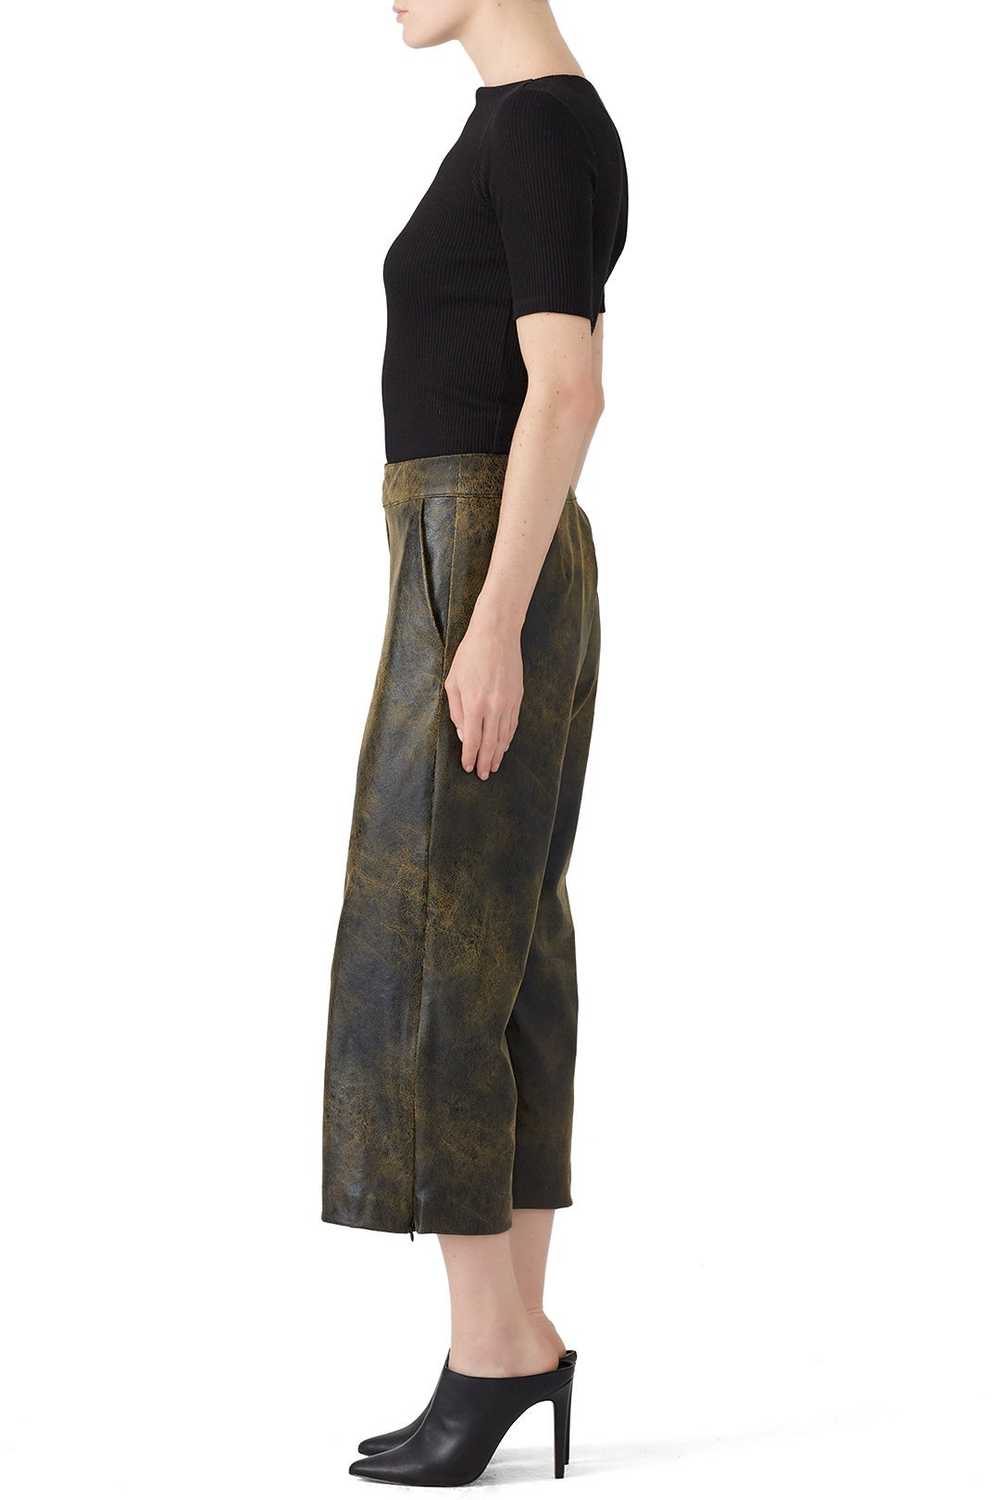 Snider Franz Faux Leather Gaucho Pants - image 3